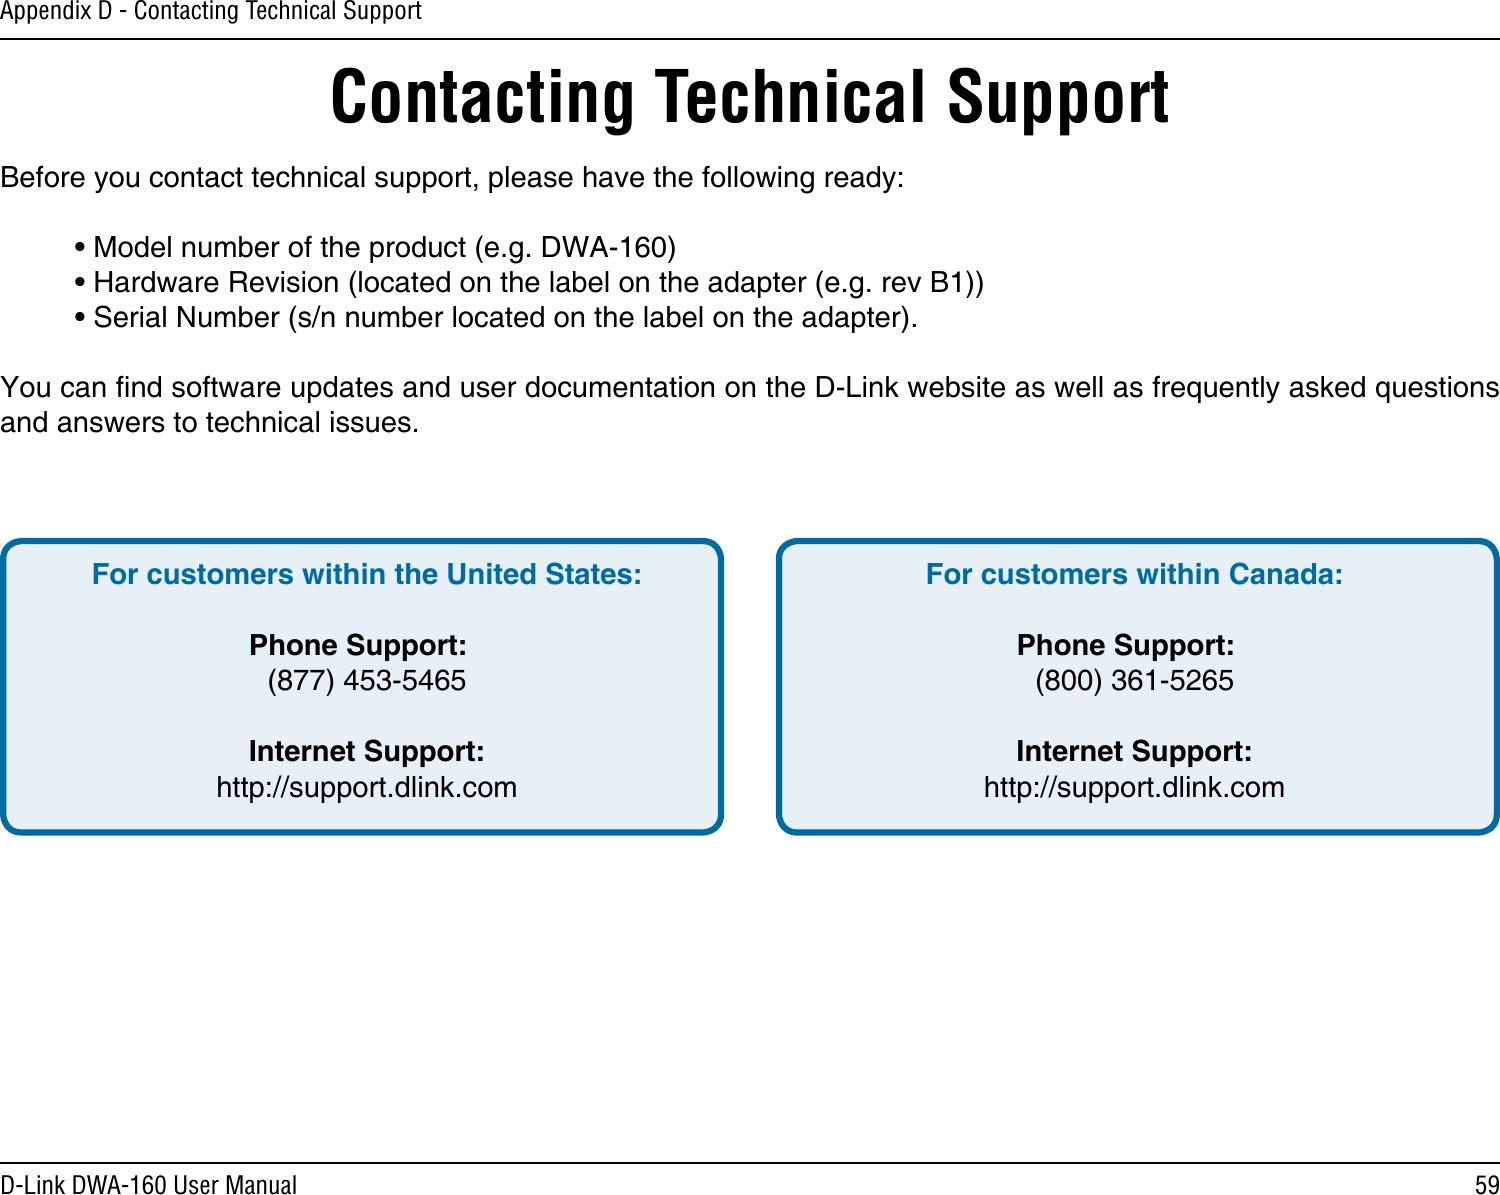 59D-Link DWA-160 User ManualAppendix D - Contacting Technical SupportContacting Technical SupportBefore you contact technical support, please have the following ready:  • Model number of the product (e.g. DWA-160)  • Hardware Revision (located on the label on the adapter (e.g. rev B1))  • Serial Number (s/n number located on the label on the adapter). You can nd software updates and user documentation on the D-Link website as well as frequently asked questions and answers to technical issues.For customers within the United States: Phone Support:  (877) 453-5465 Internet Support:  http://support.dlink.com For customers within Canada: Phone Support:  (800) 361-5265    Internet Support:  http://support.dlink.com 